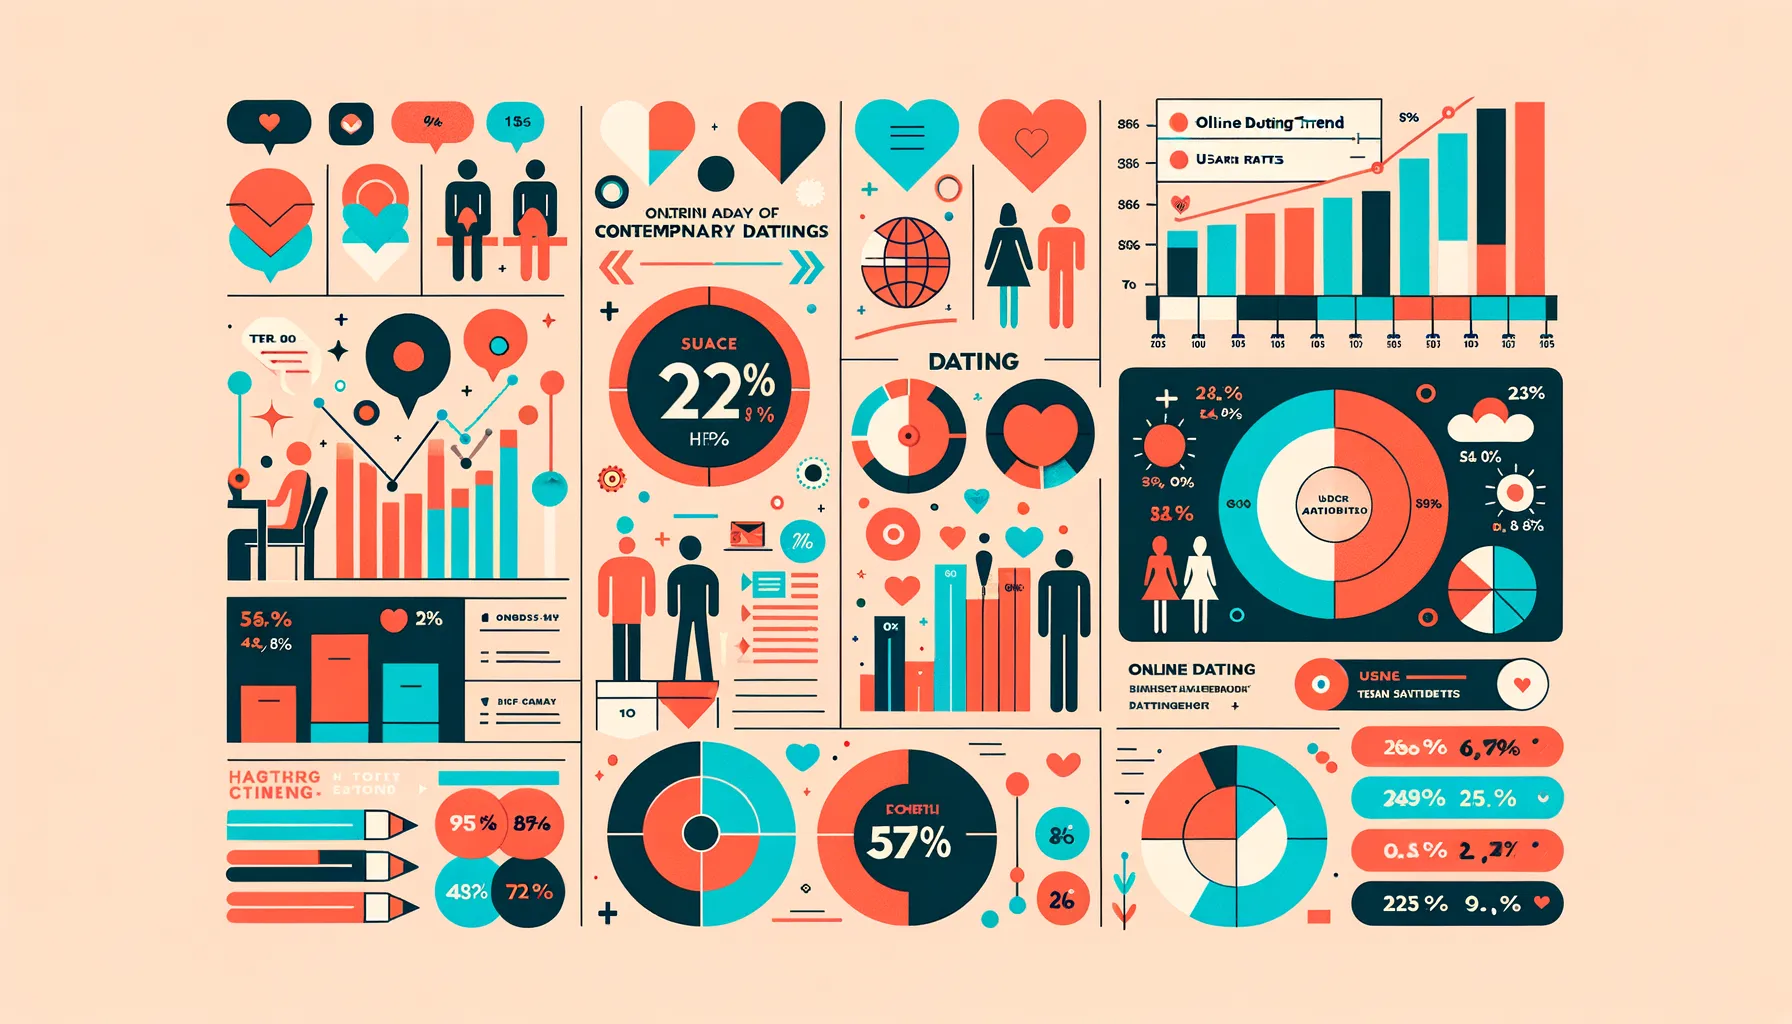 Peering through the lens of data: This infographic offers a snapshot of the vibrant and multifaceted world of dating today, revealing not just numbers, but the human pursuit of connection in a digital age. Each statistic tells a story of aspirations, challenges, and the relentless search for love.